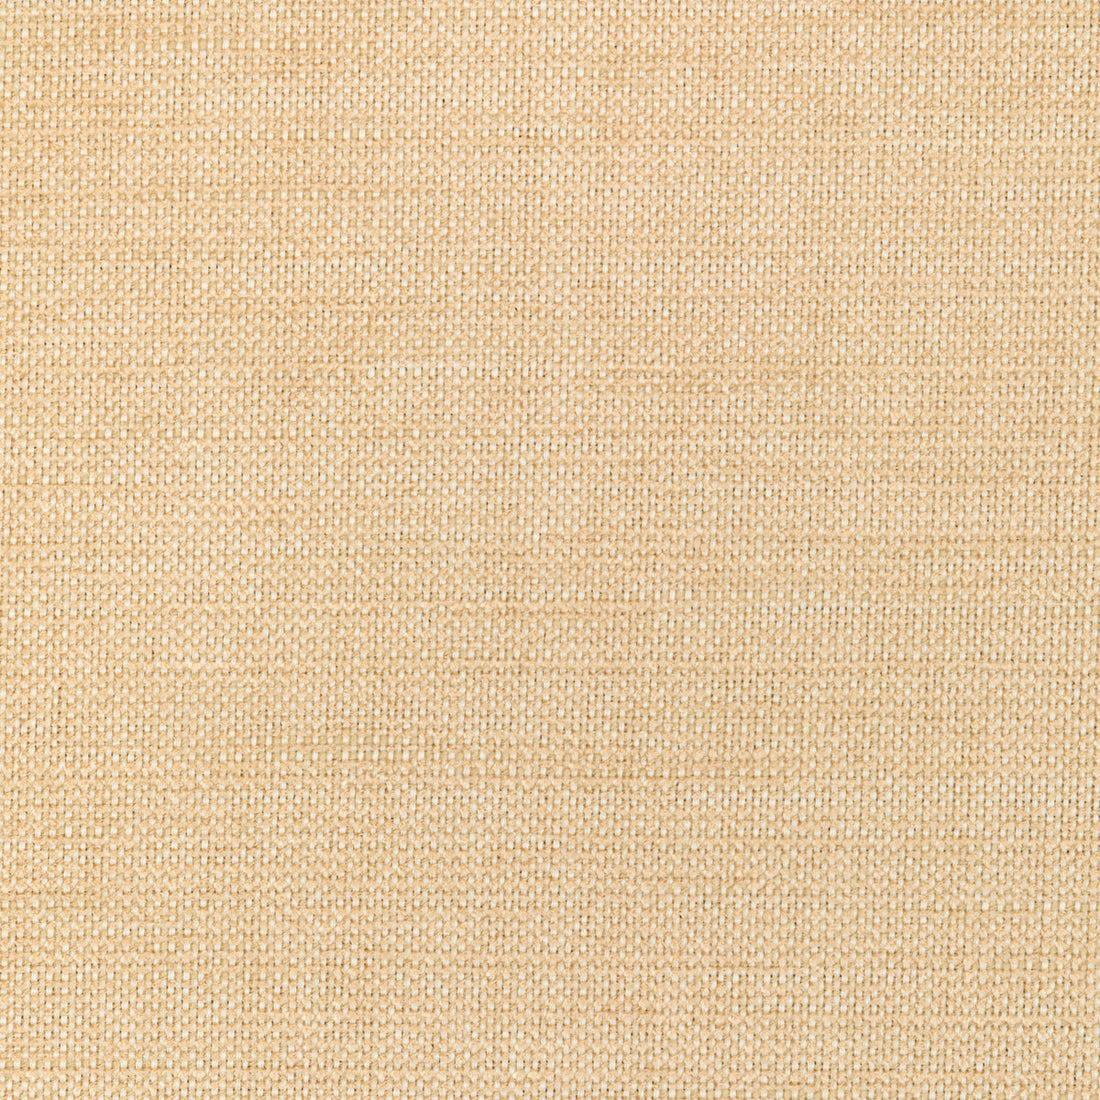 Kravet Smart fabric in 36302-116 color - pattern 36302.116.0 - by Kravet Smart in the Performance Crypton Home collection